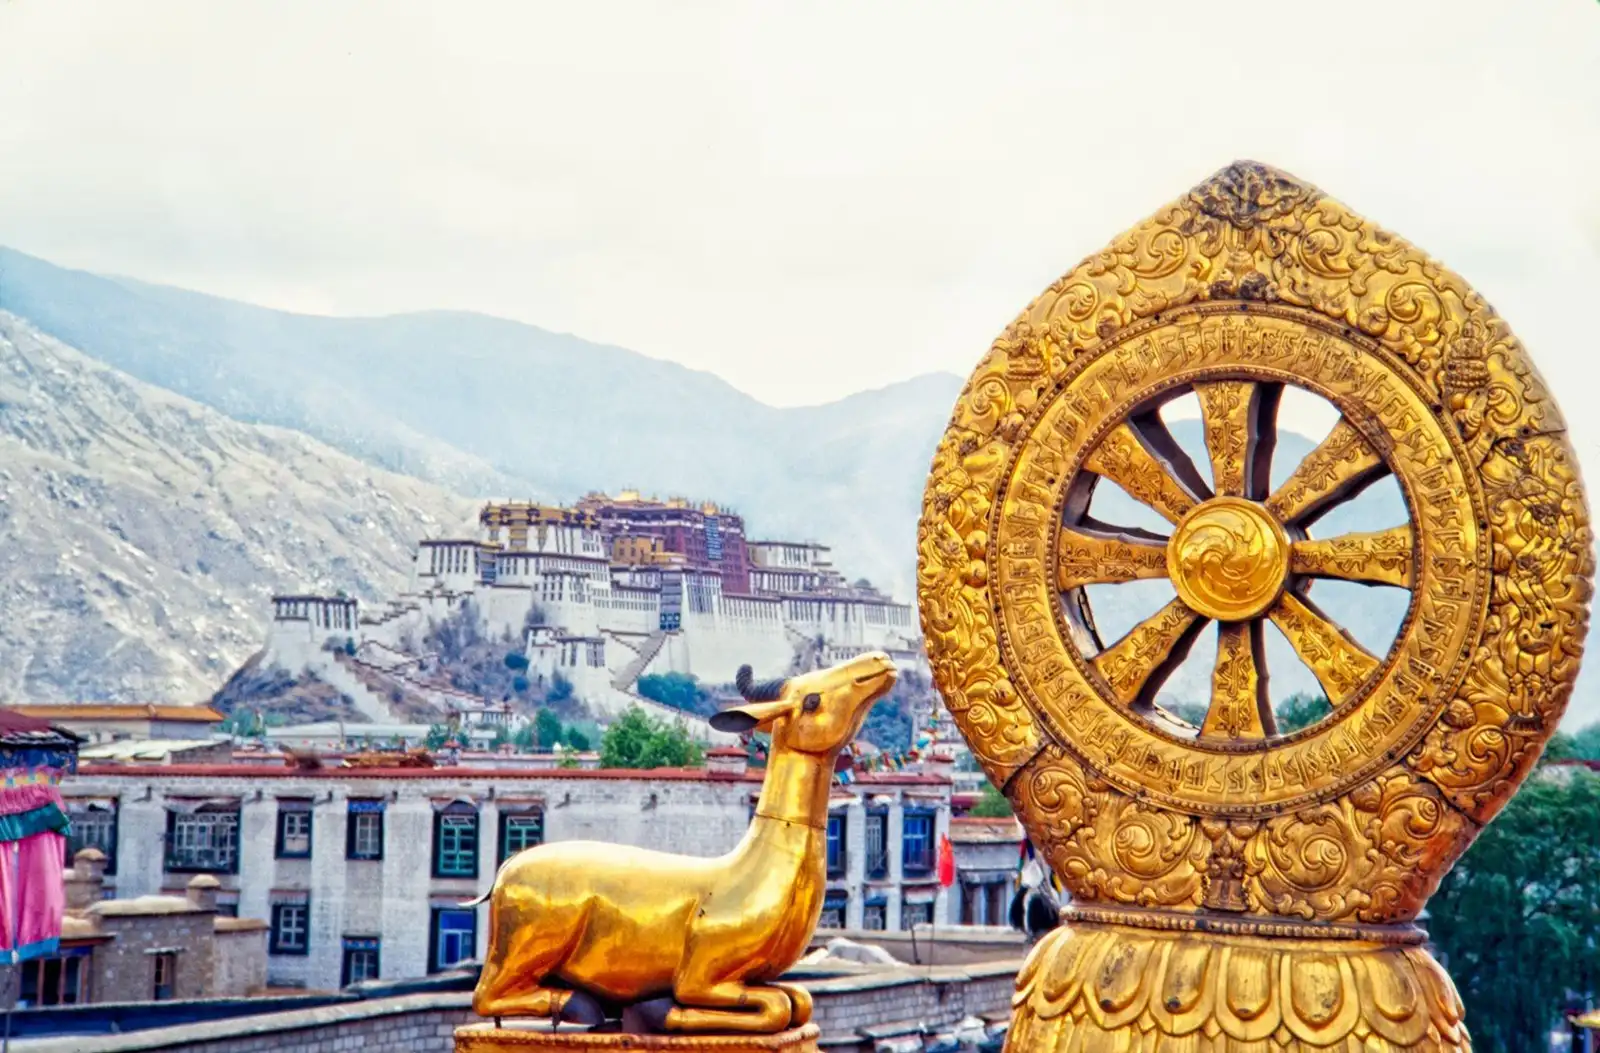 Golden dharma wheel and deer sculptures at the Jokhang Temple in Lhasa